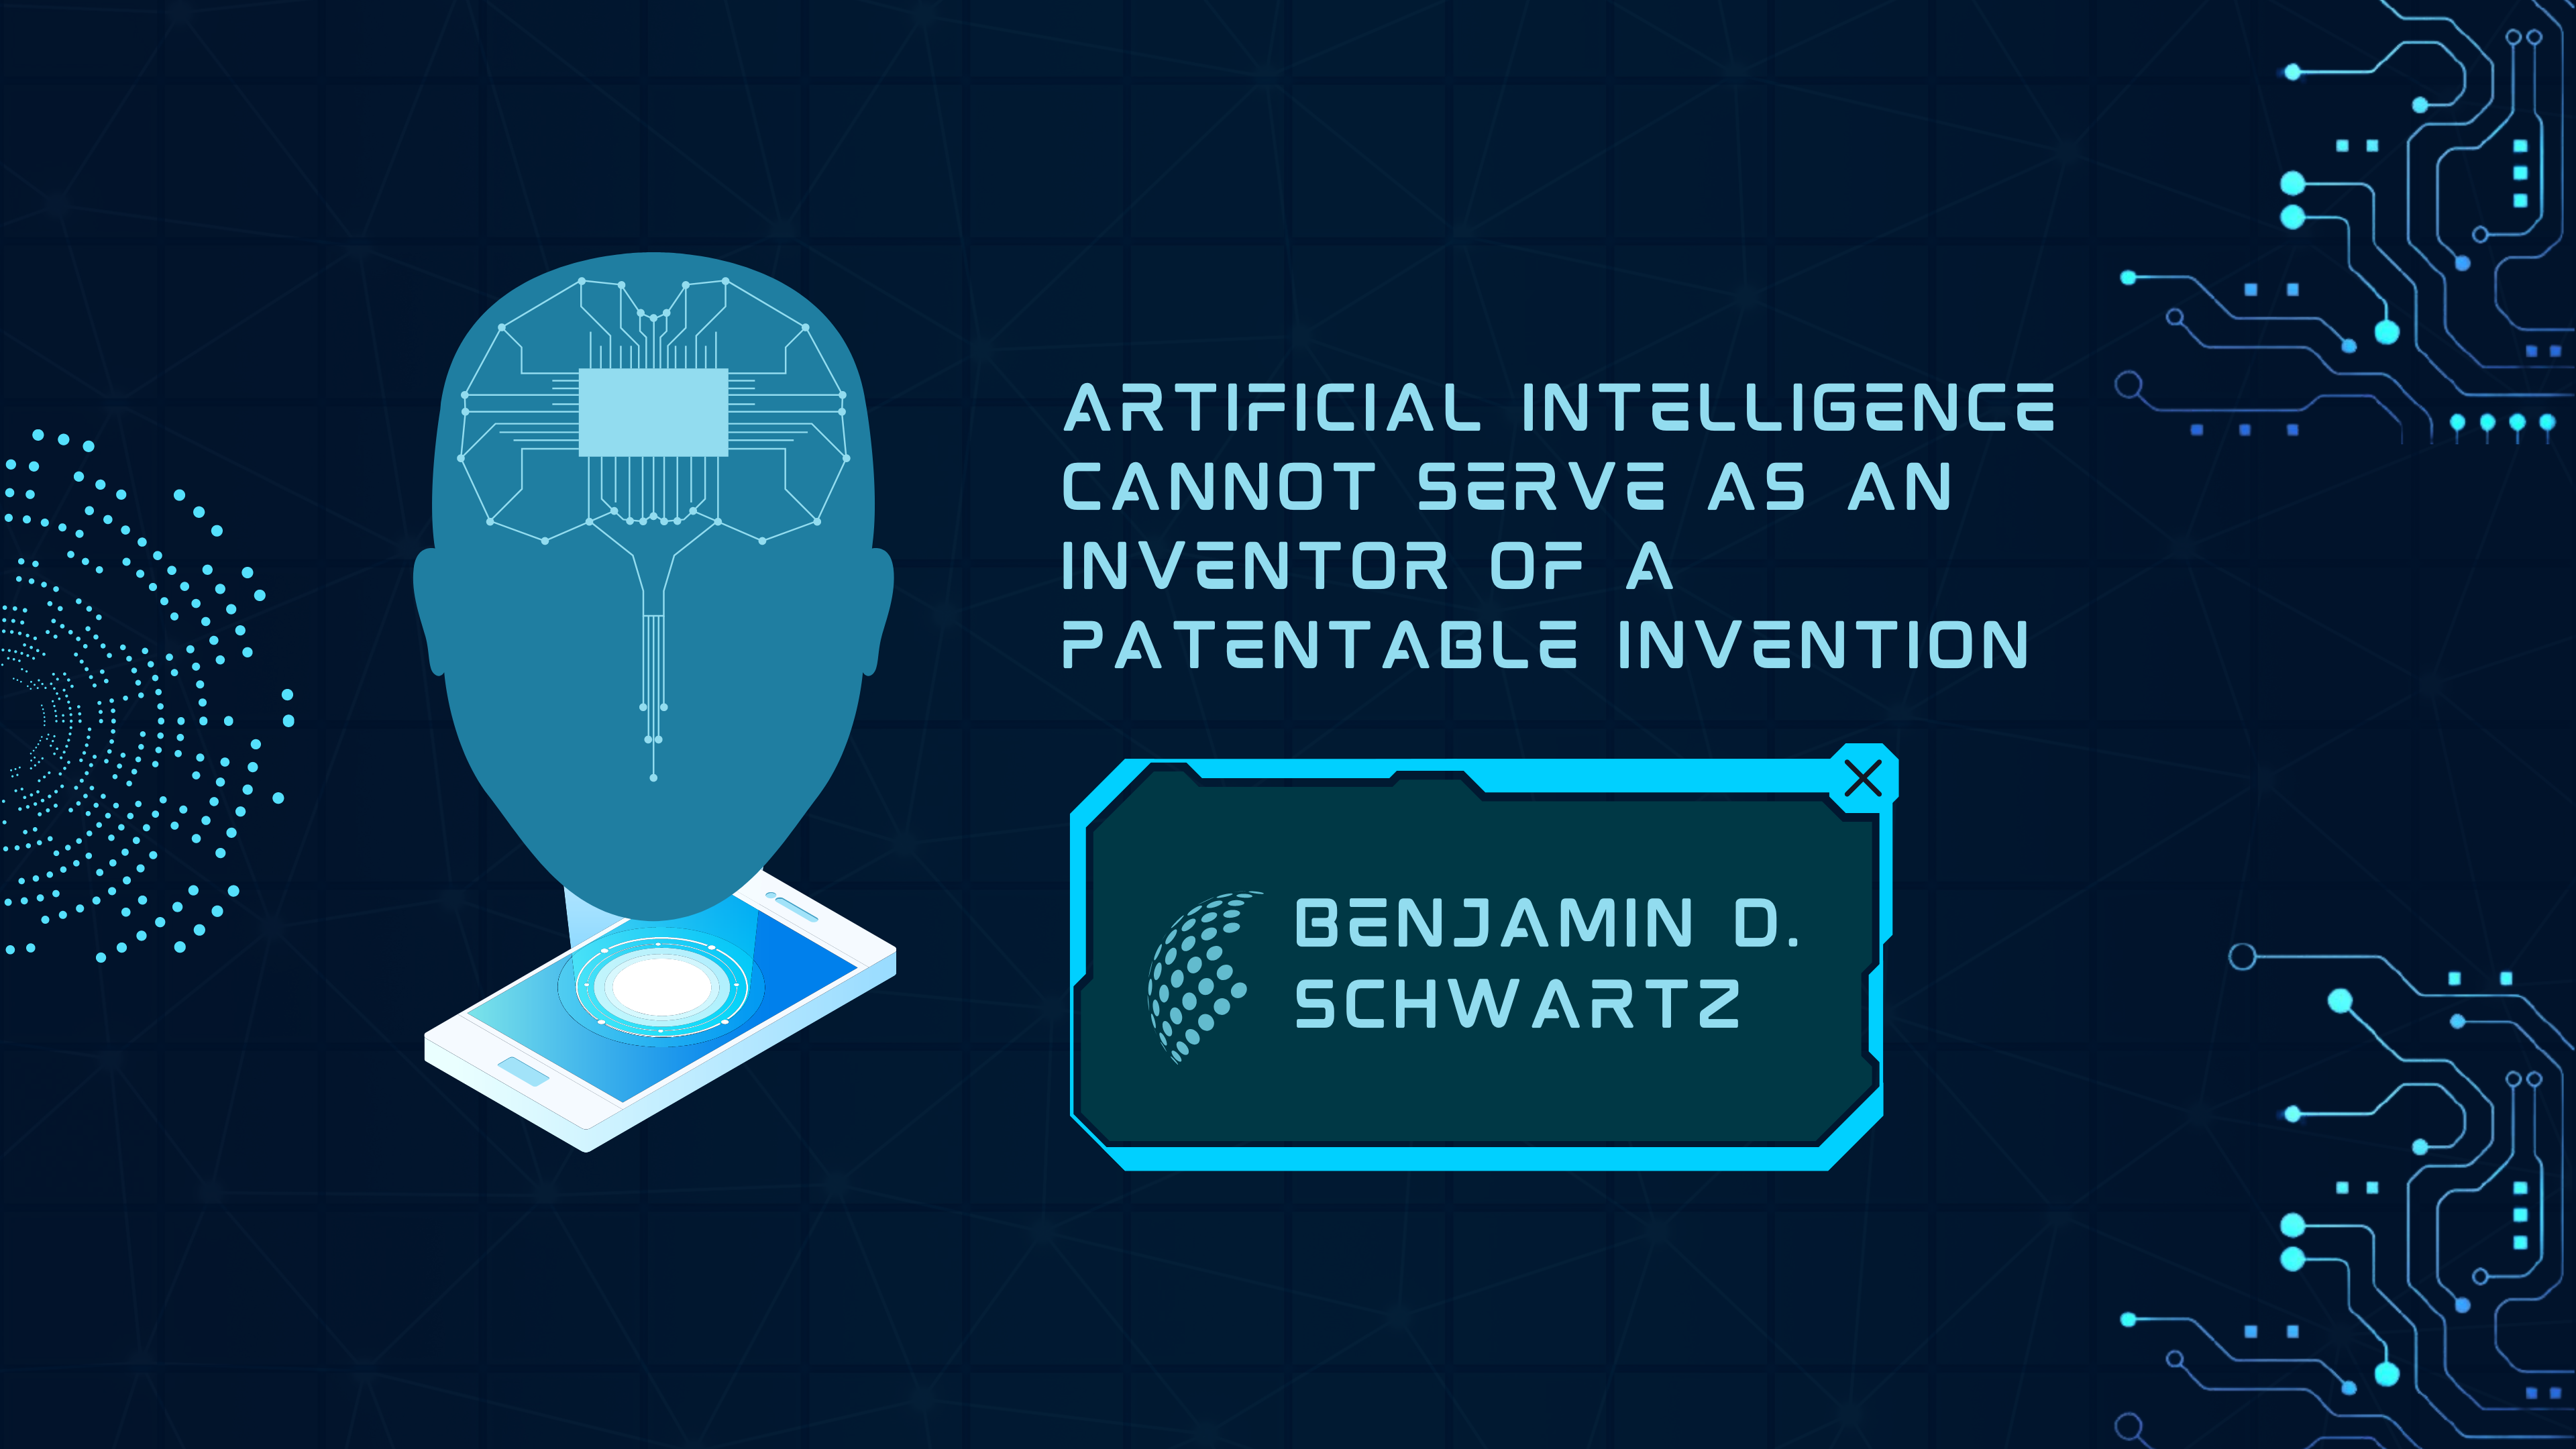 Artificial Intelligence Cannot Serve as an Inventor of a Patentable Invention